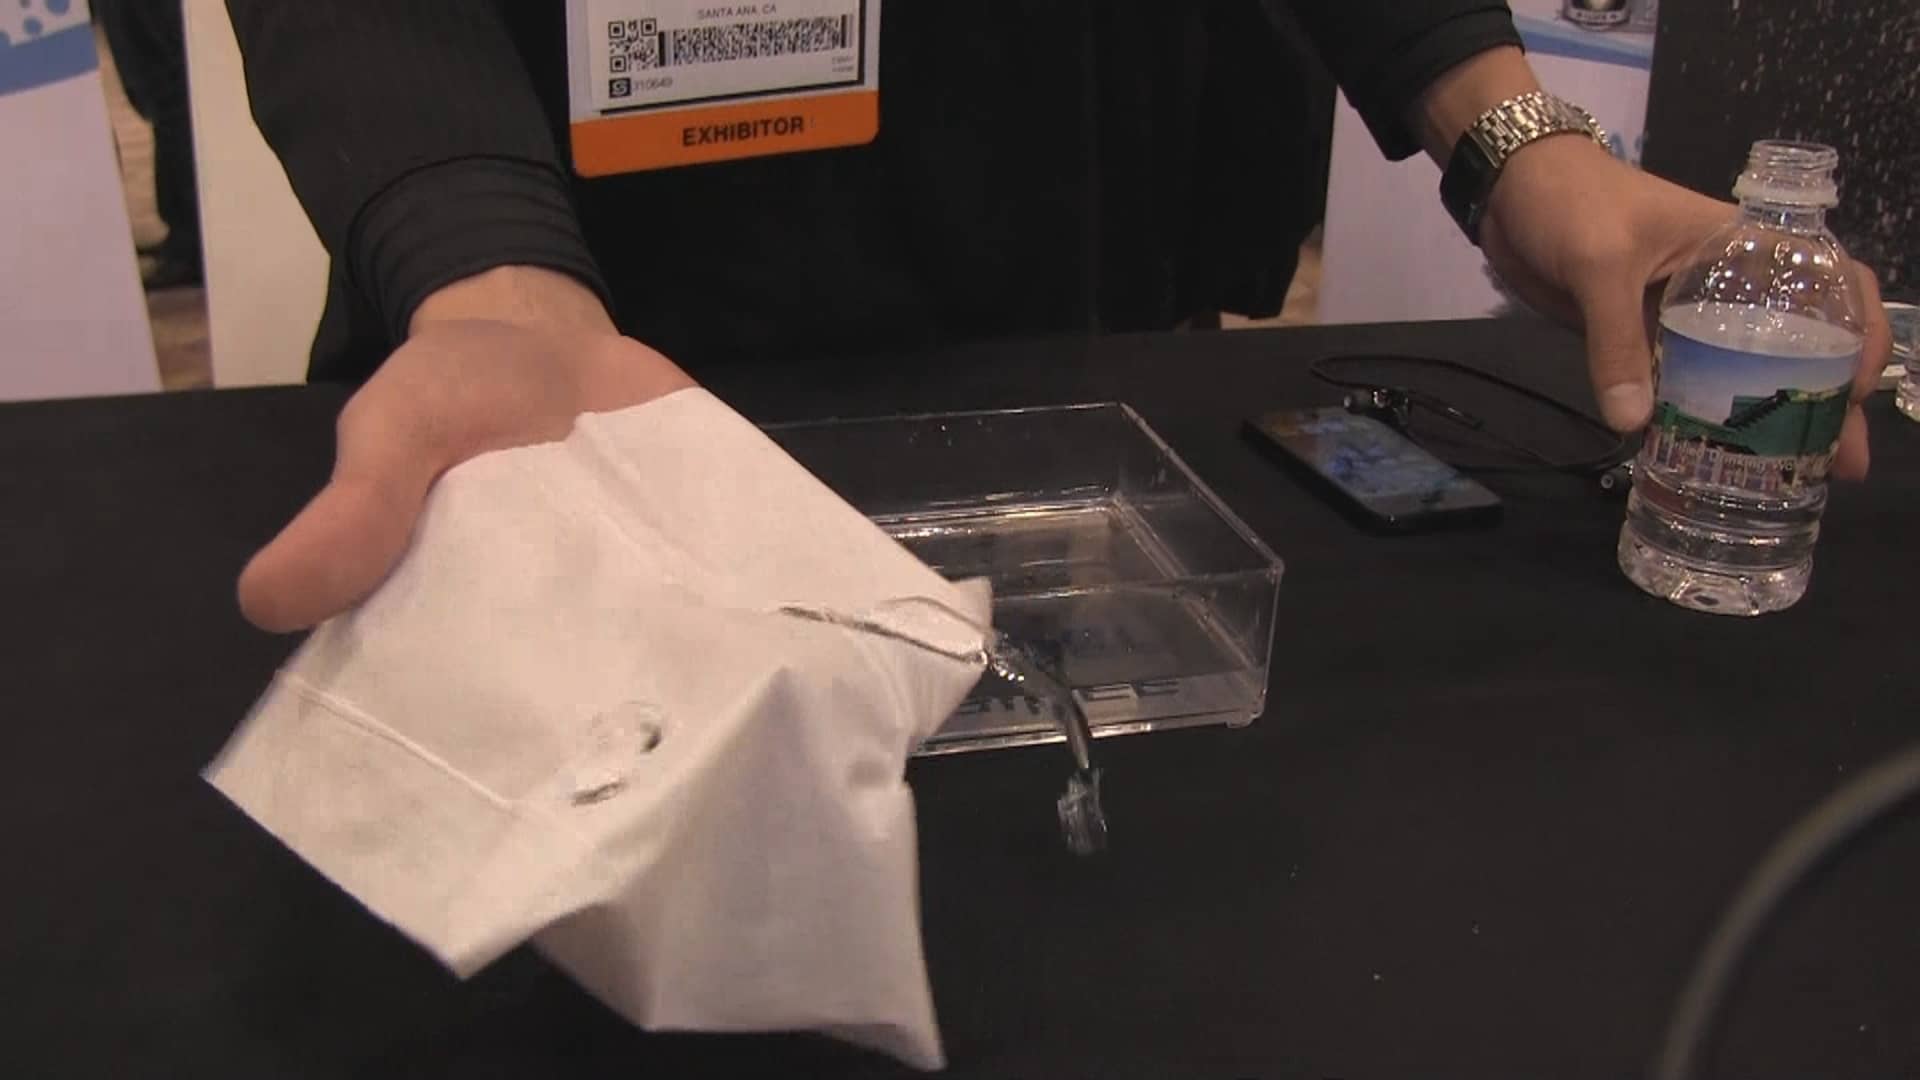 A demonstration of material that prevents water from damaging electronics.